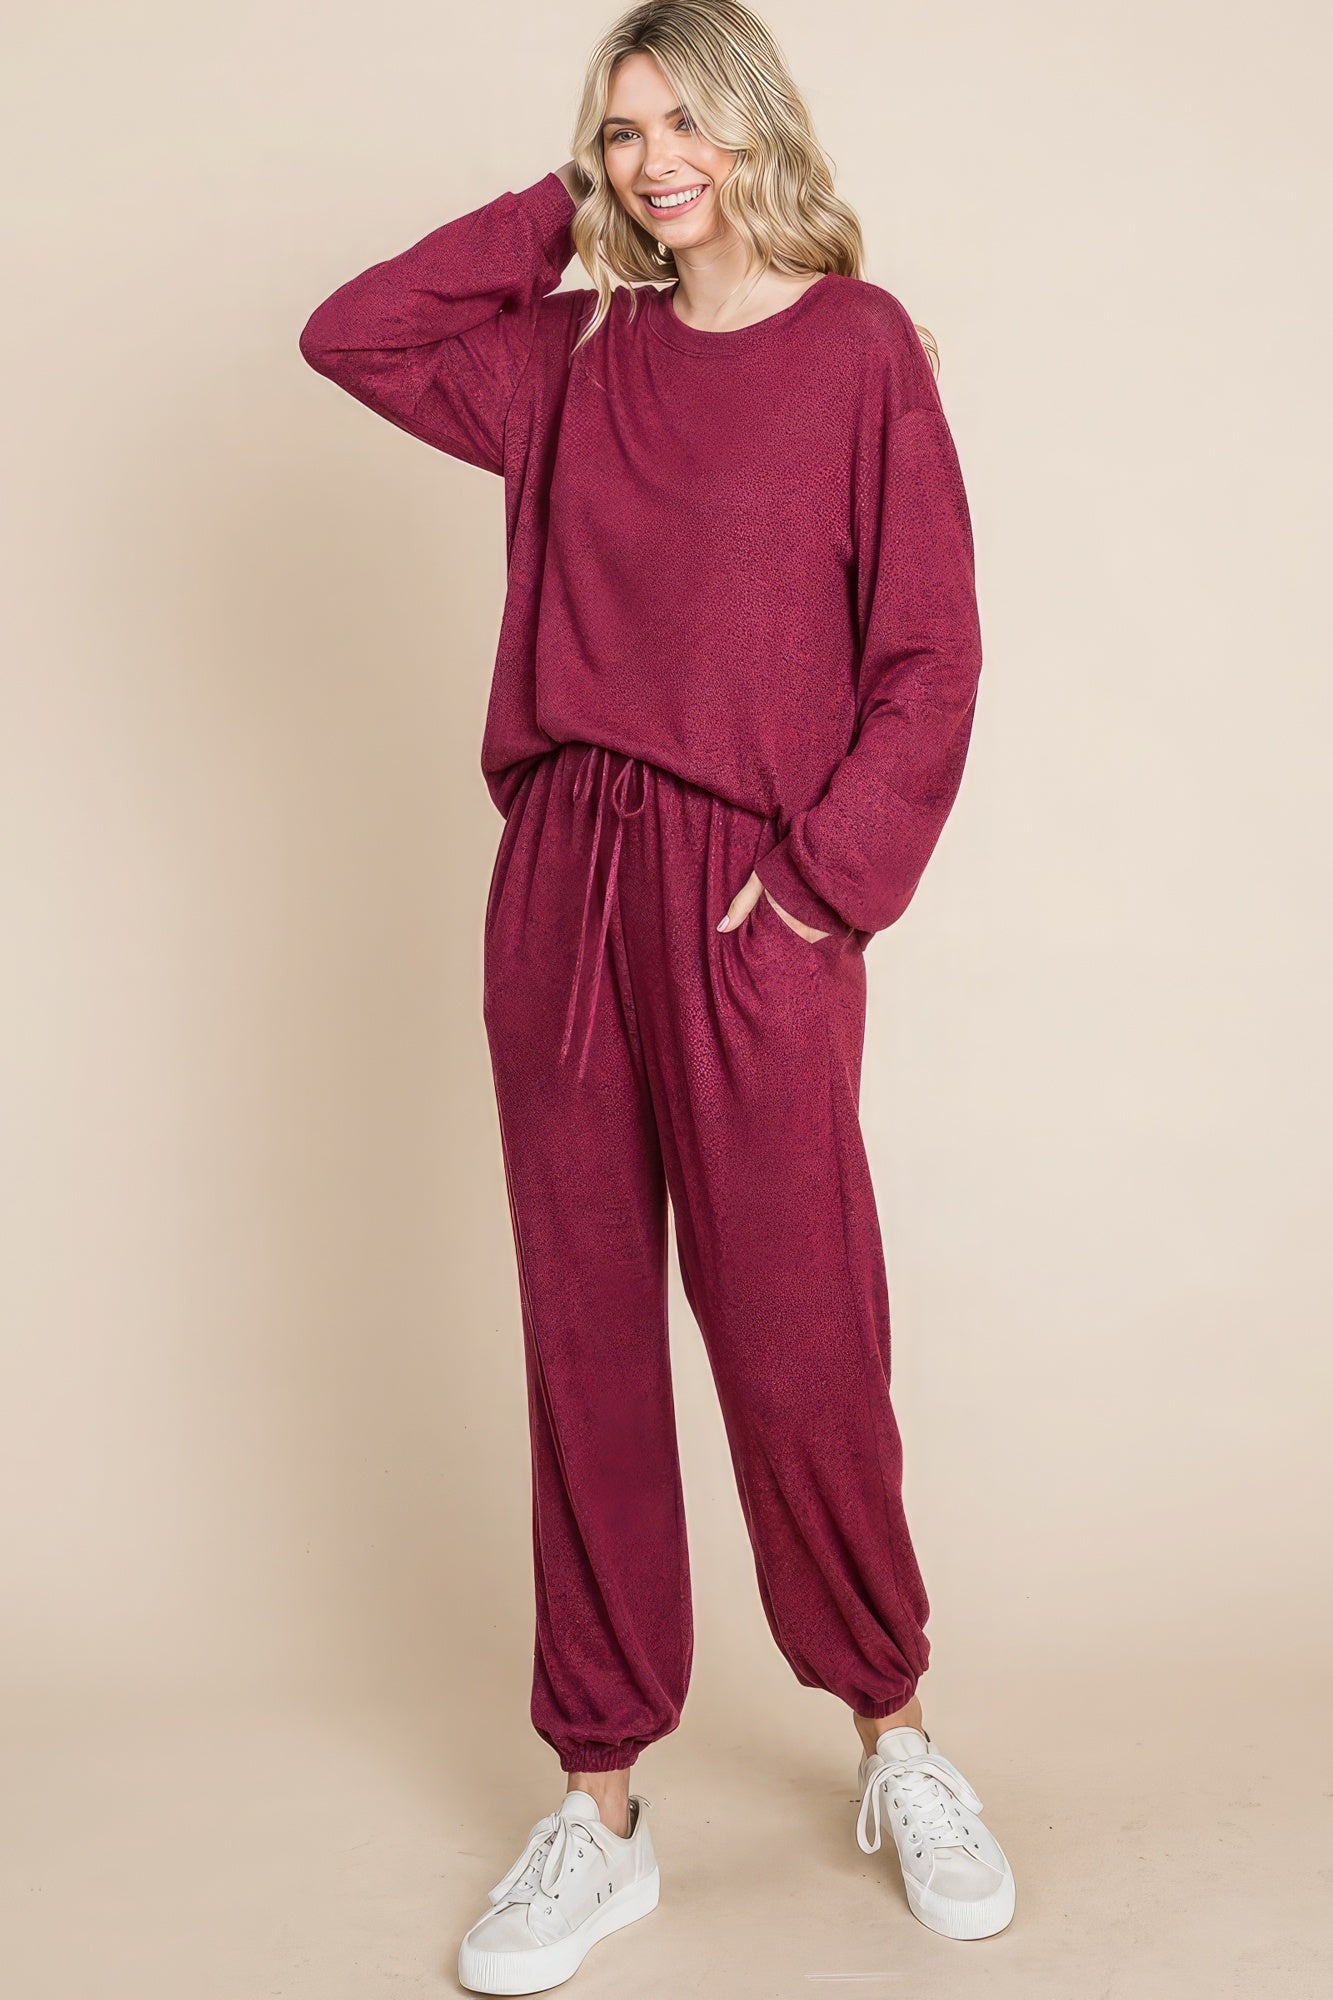 Two Tone Solid Warm And Soft Hacci Brush Loungewear Set